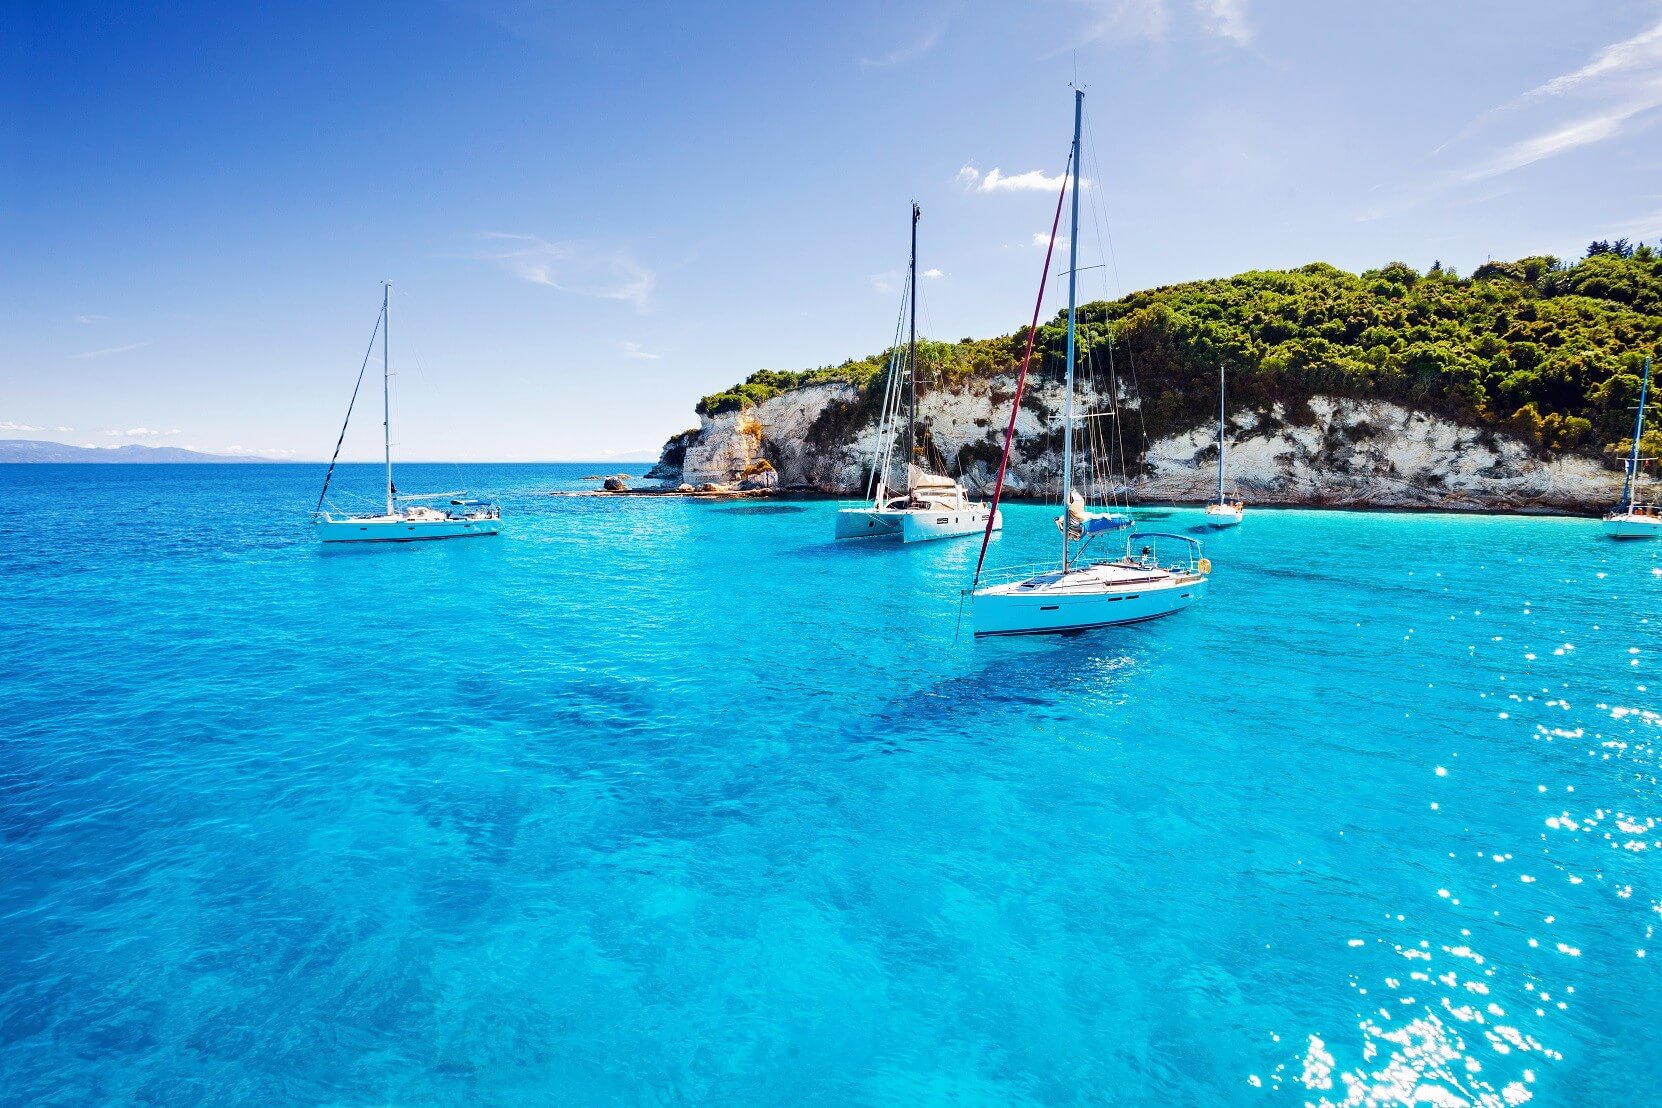 Turquoise and blue ocean with small green islands surrounded by white coasts and a speed boat sailing in the water